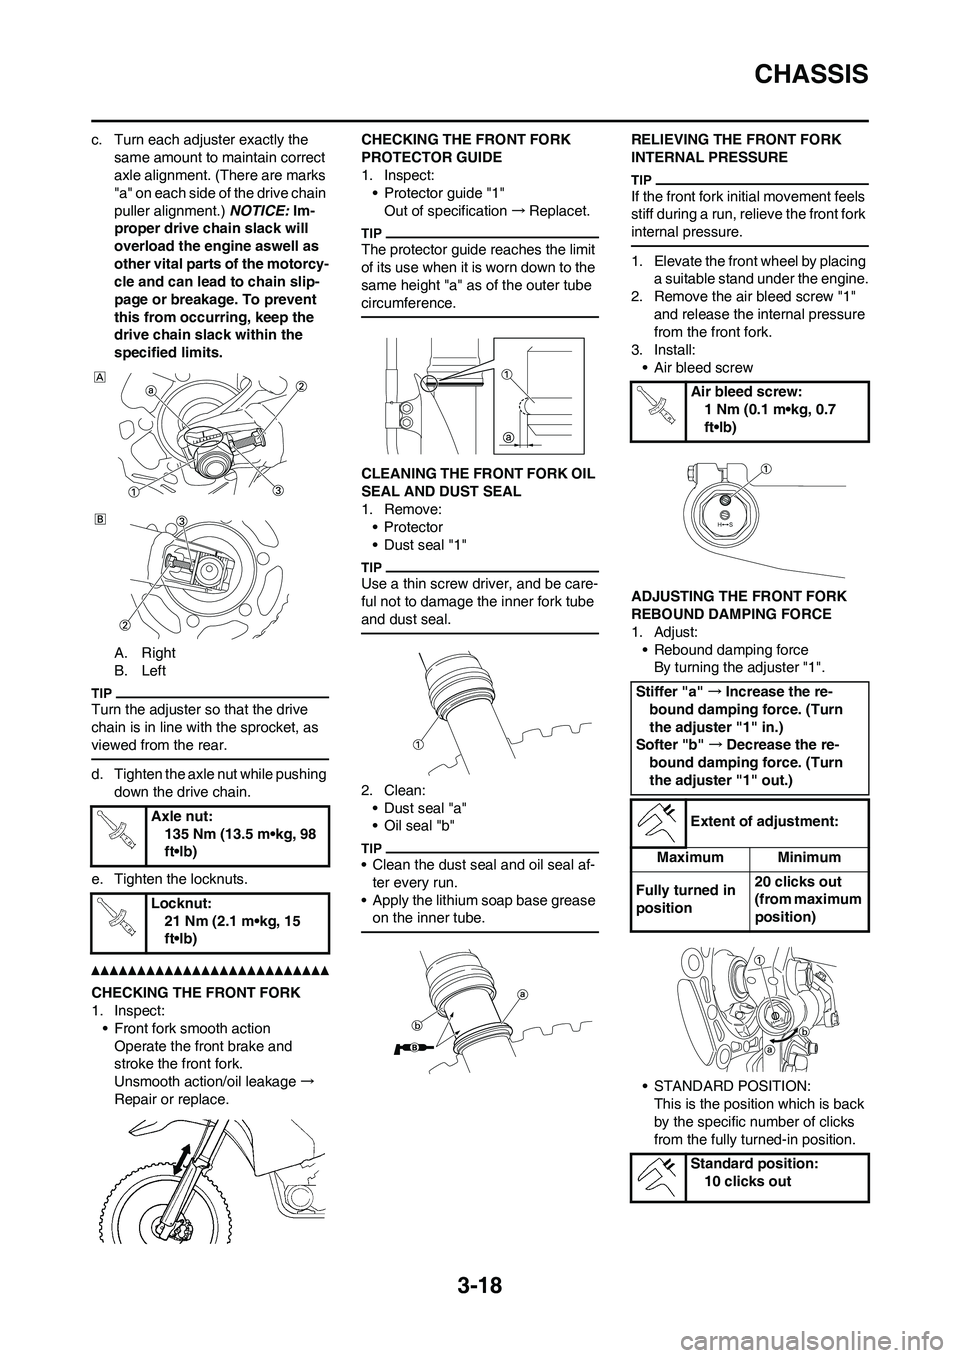 YAMAHA YZ450F 2010  Owners Manual 3-18
CHASSIS
c. Turn each adjuster exactly the 
same amount to maintain correct 
axle alignment. (There are marks 
"a" on each side of the drive chain 
puller alignment.) NOTICE: Im-
proper drive chai